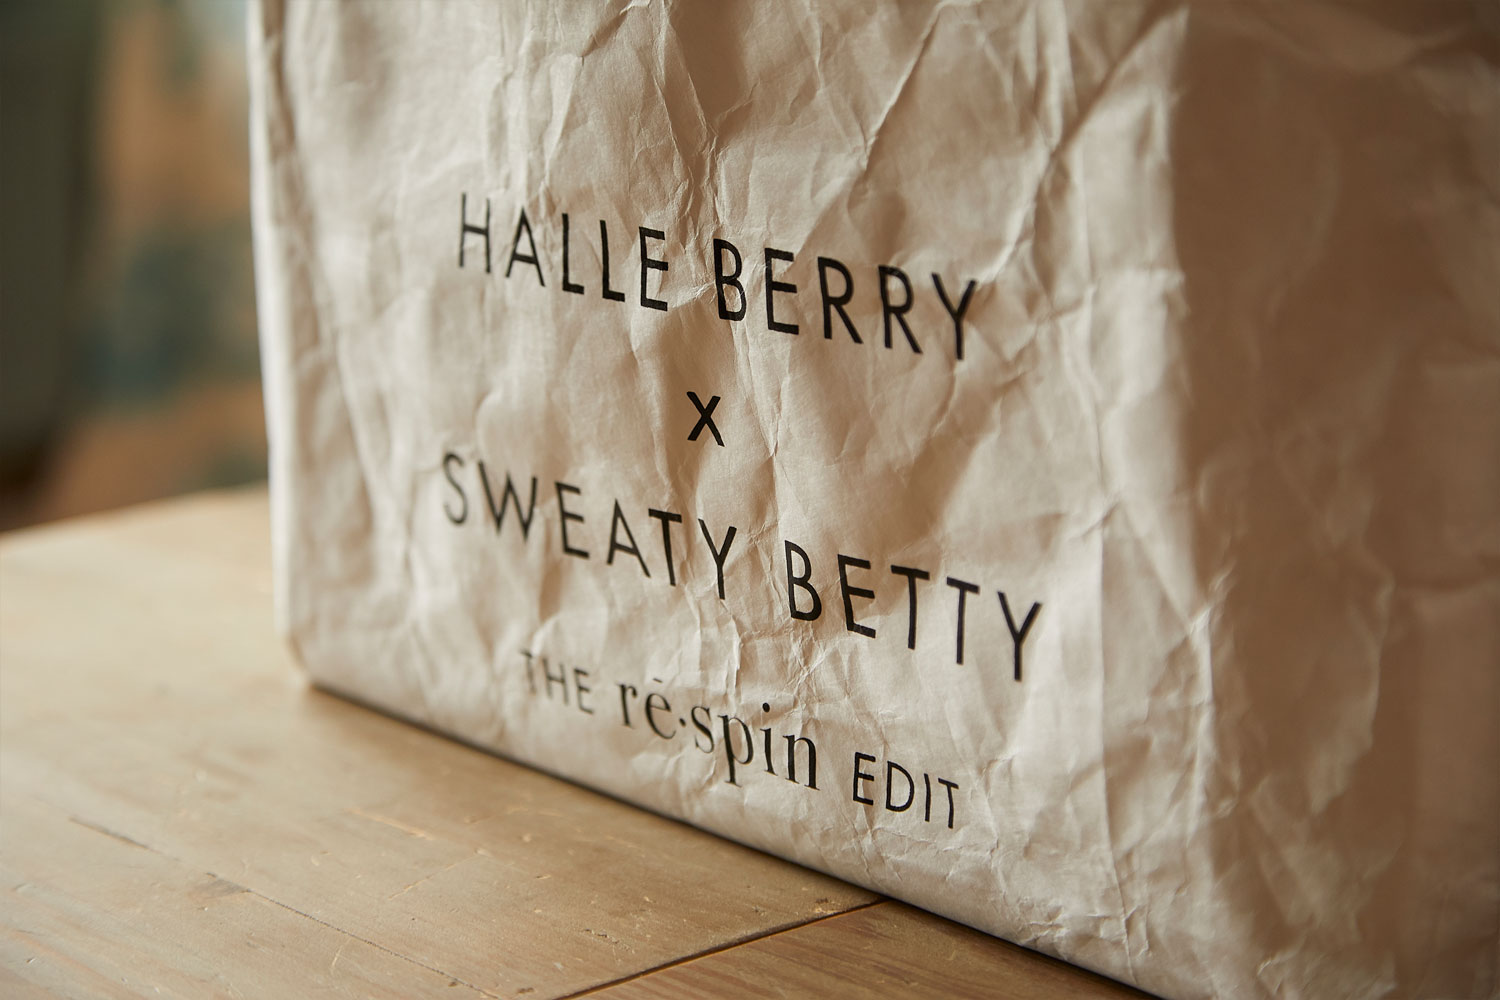 Vip Gifting Packaging Production Manufacture Halle Berry Sweaty Betty Handmade Launch A List Celebrity Tyvek Colorplan G F Smith Luxury Box Custom Bag Limited Edition Progress 07